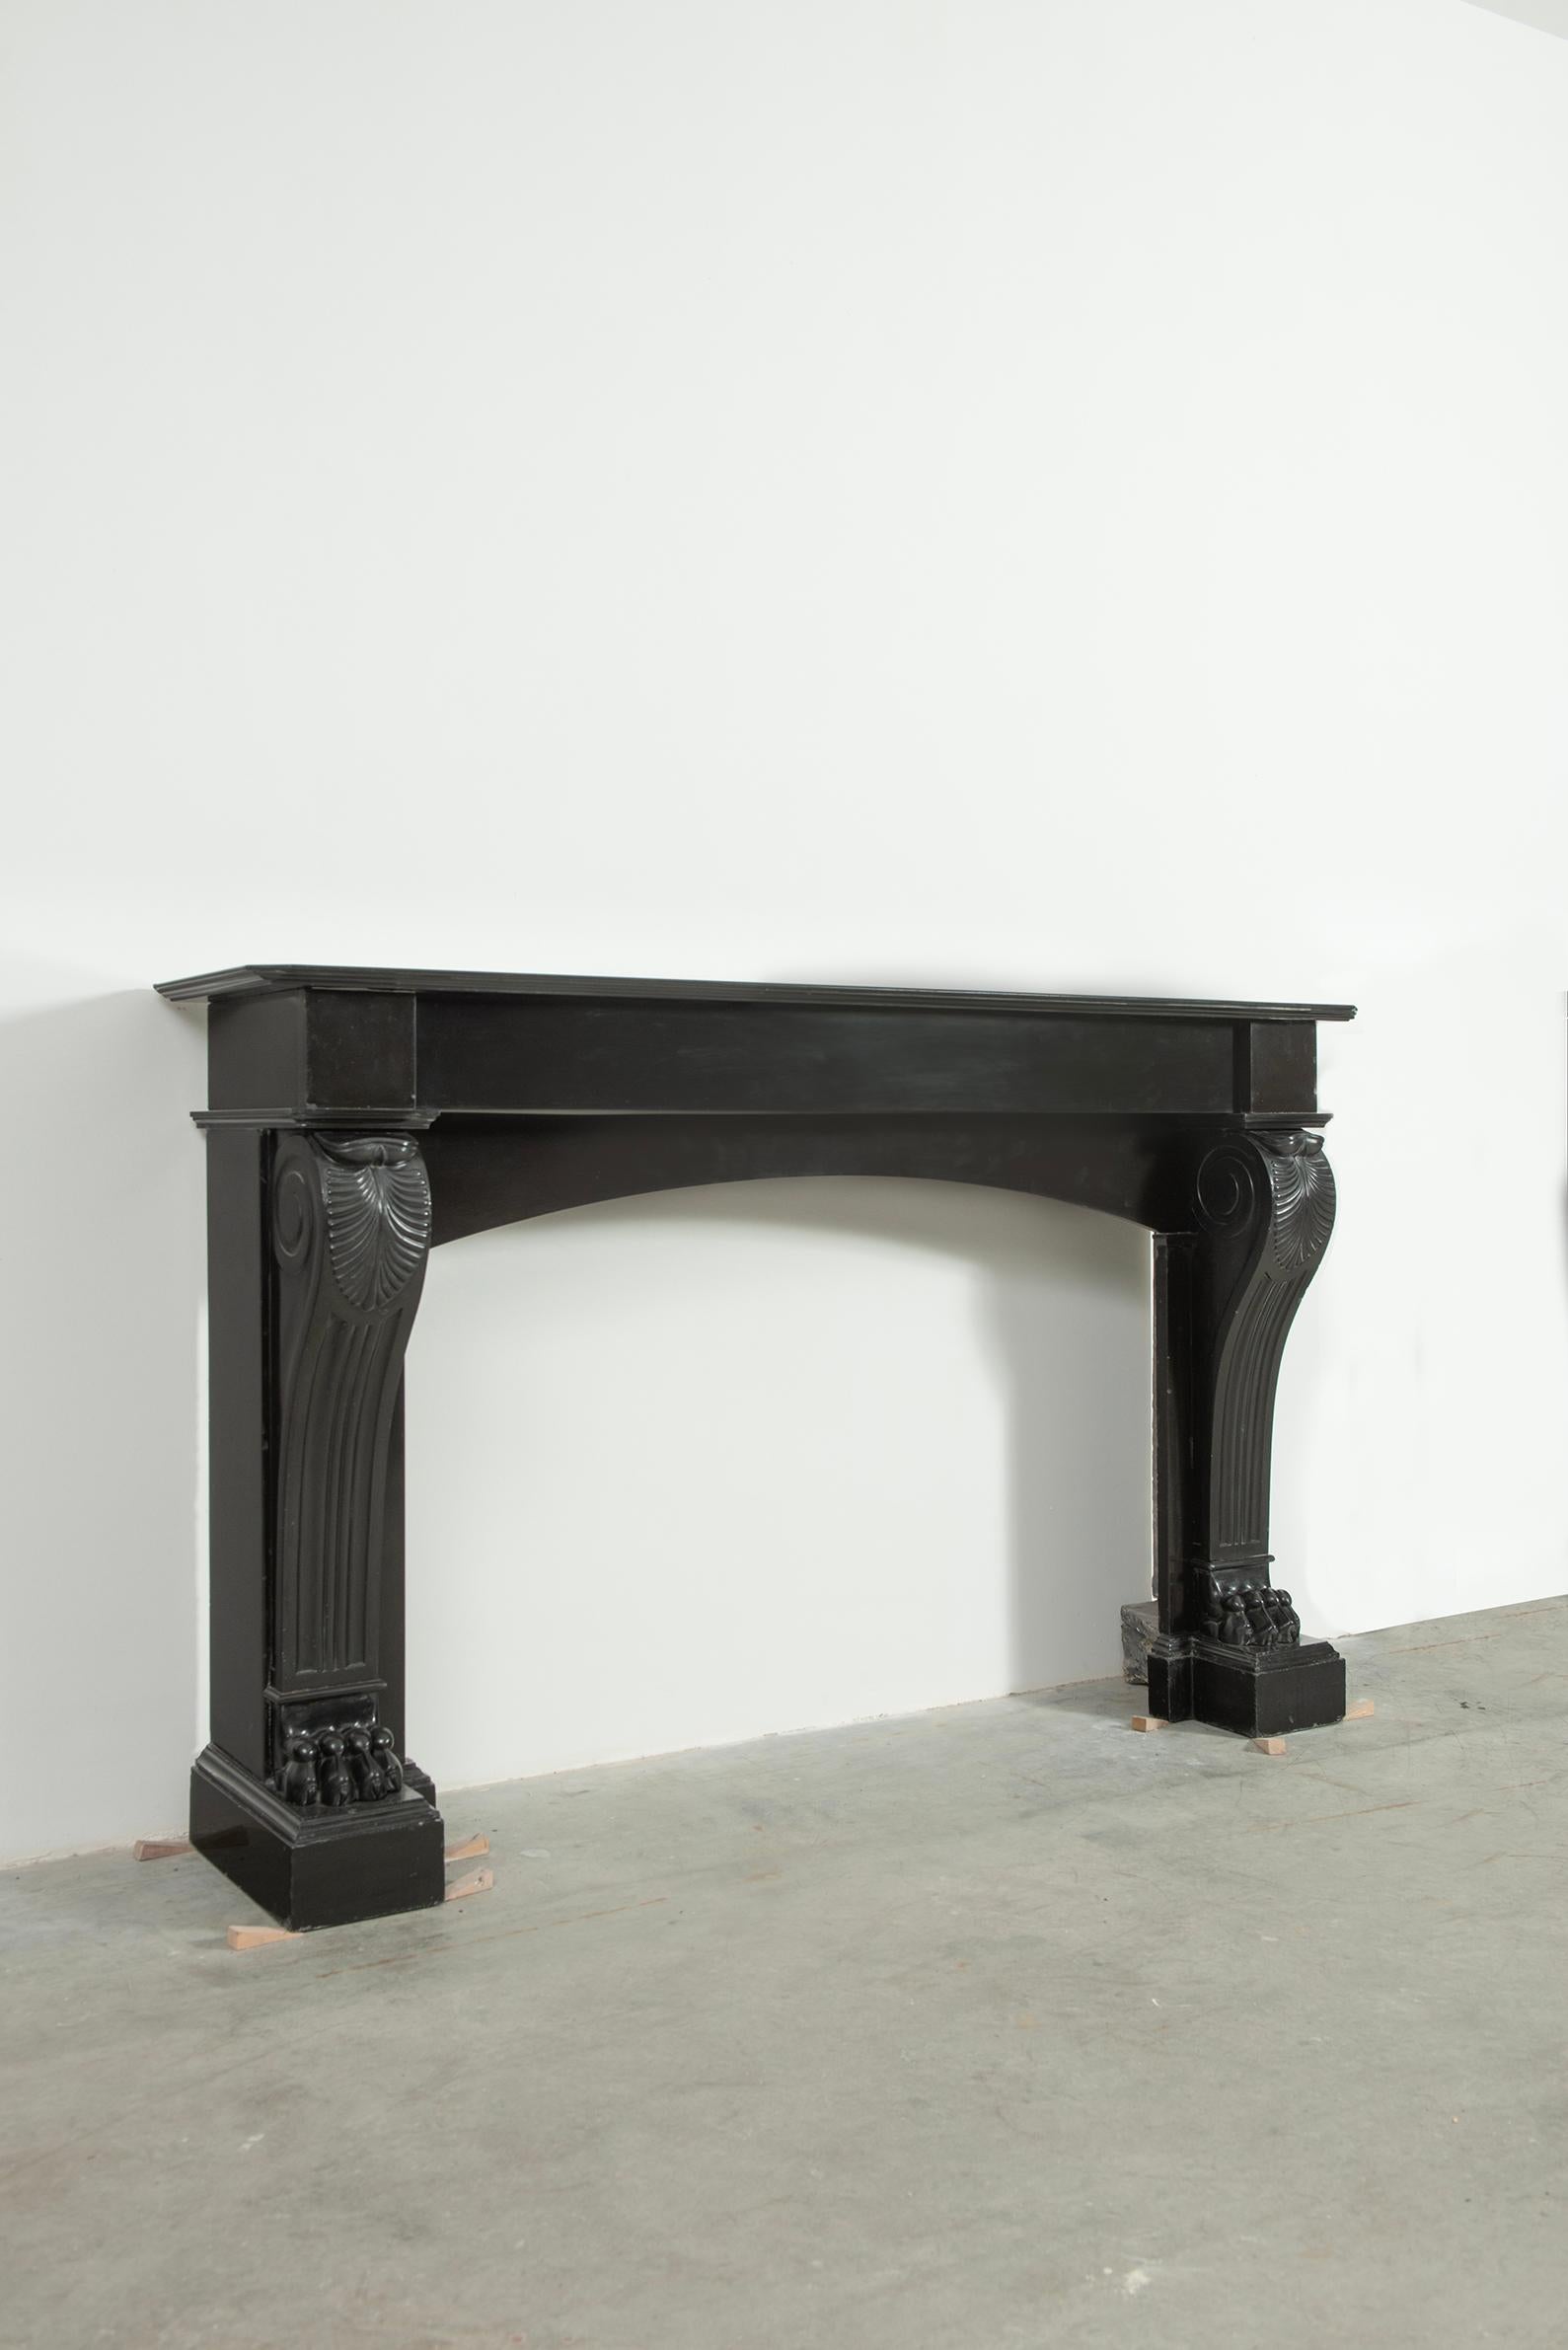 Very happy to offer this French Louis Phillipe fireplace in deep black belgian marble.
This mantel came from the outskirts of Paris.
The overall execution and carving is exceptionally well done, the details in the lion paws, the nails and the leaved